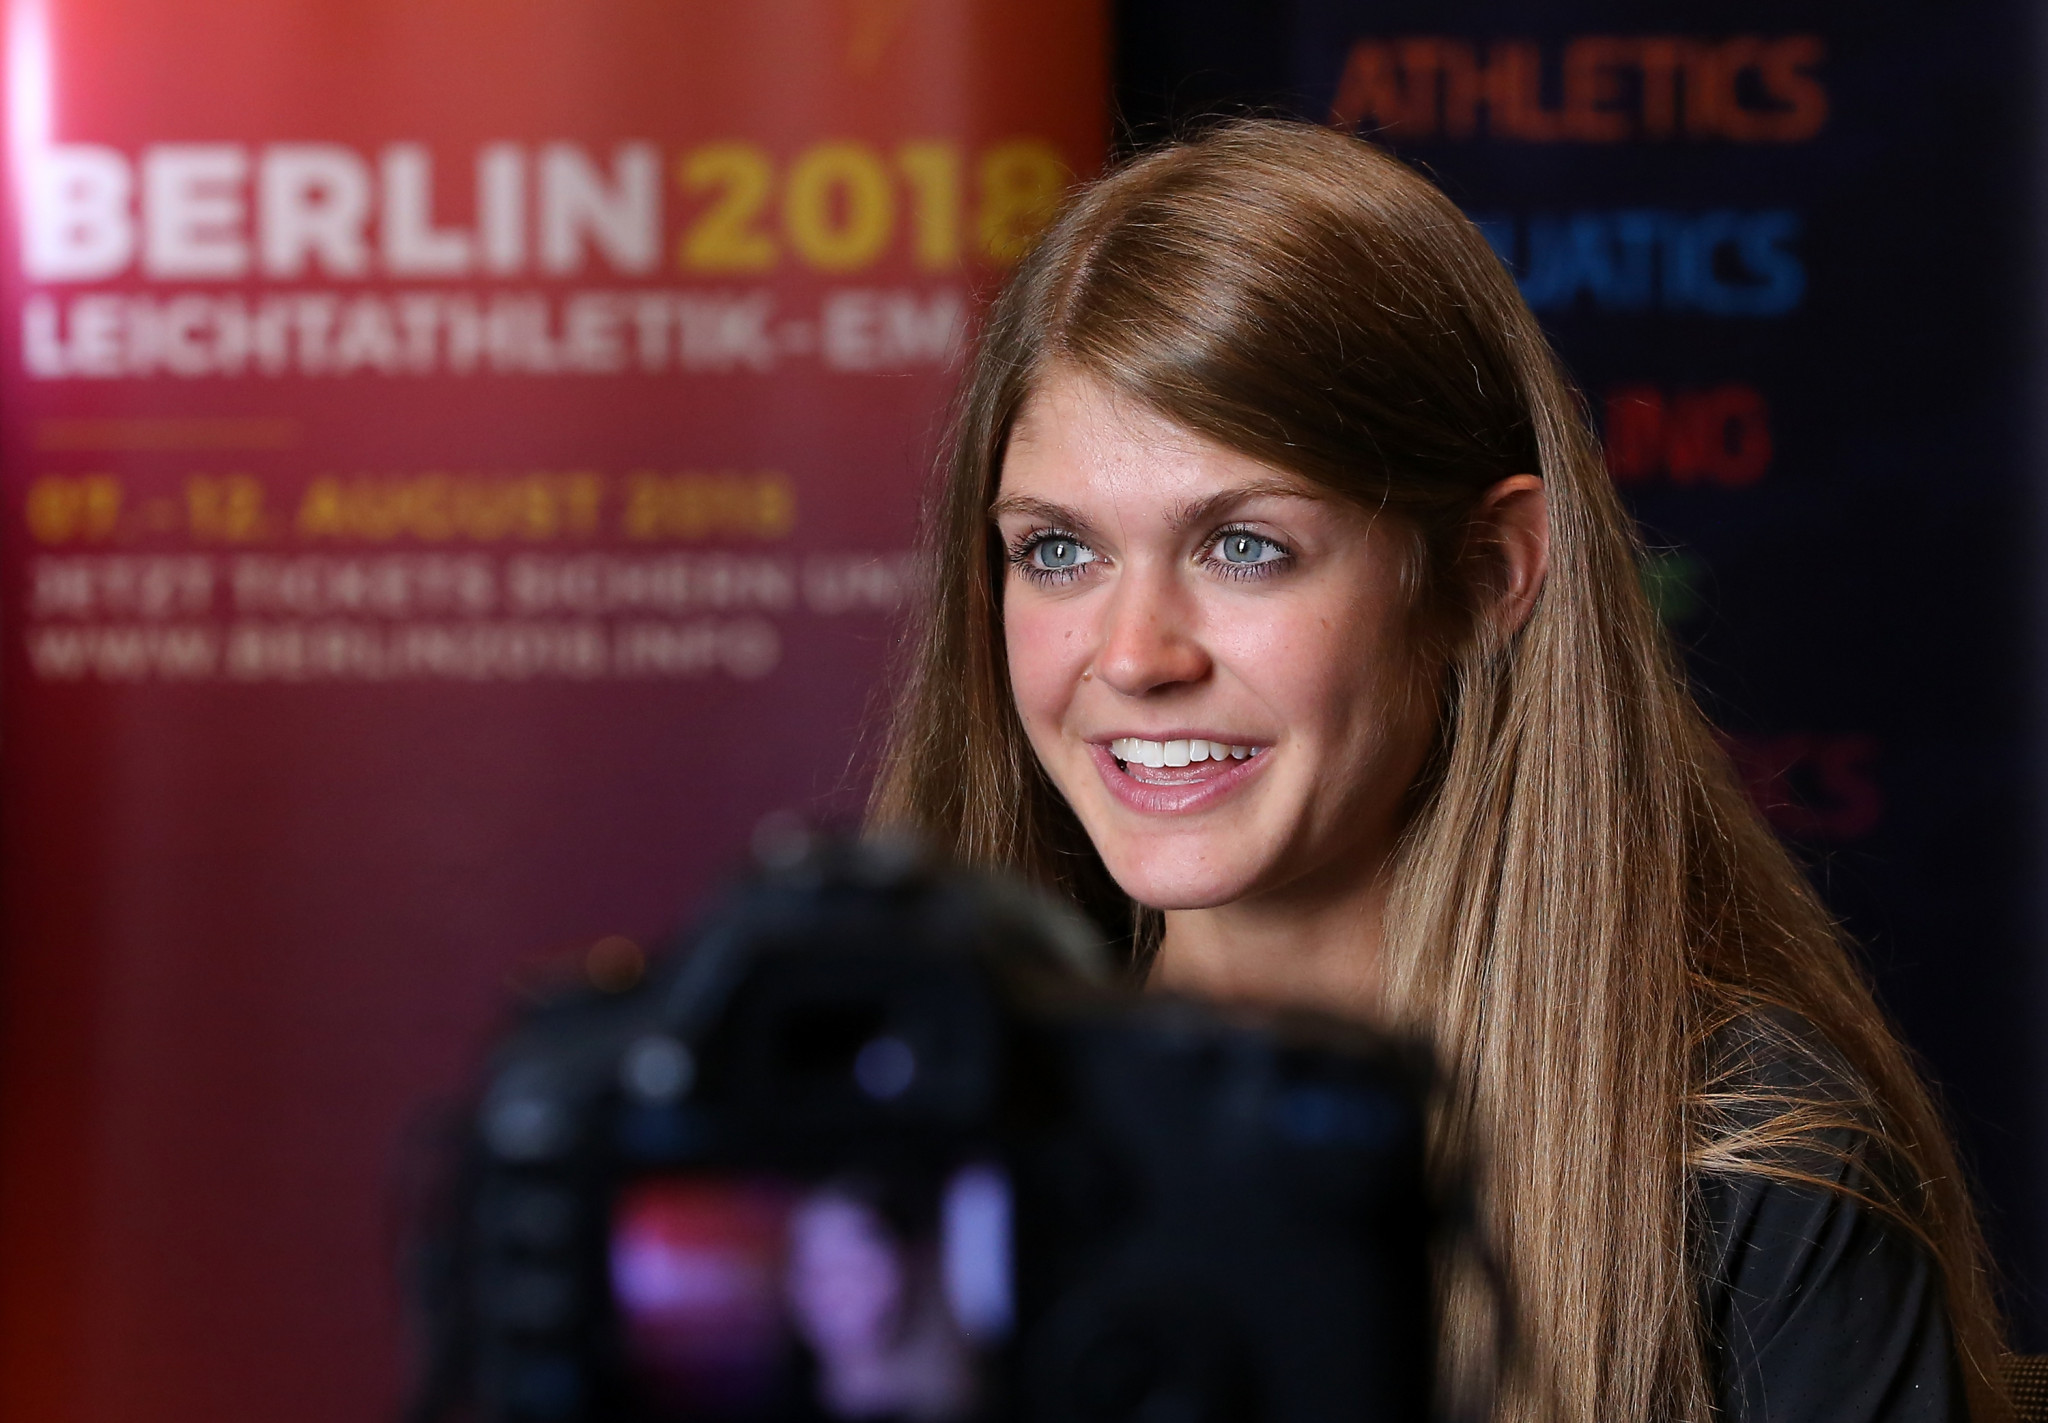 German middle-distance runner Konstanze Klosterhalfen is hoping to claim a home gold medal at Berlin 2018 ©Getty Images